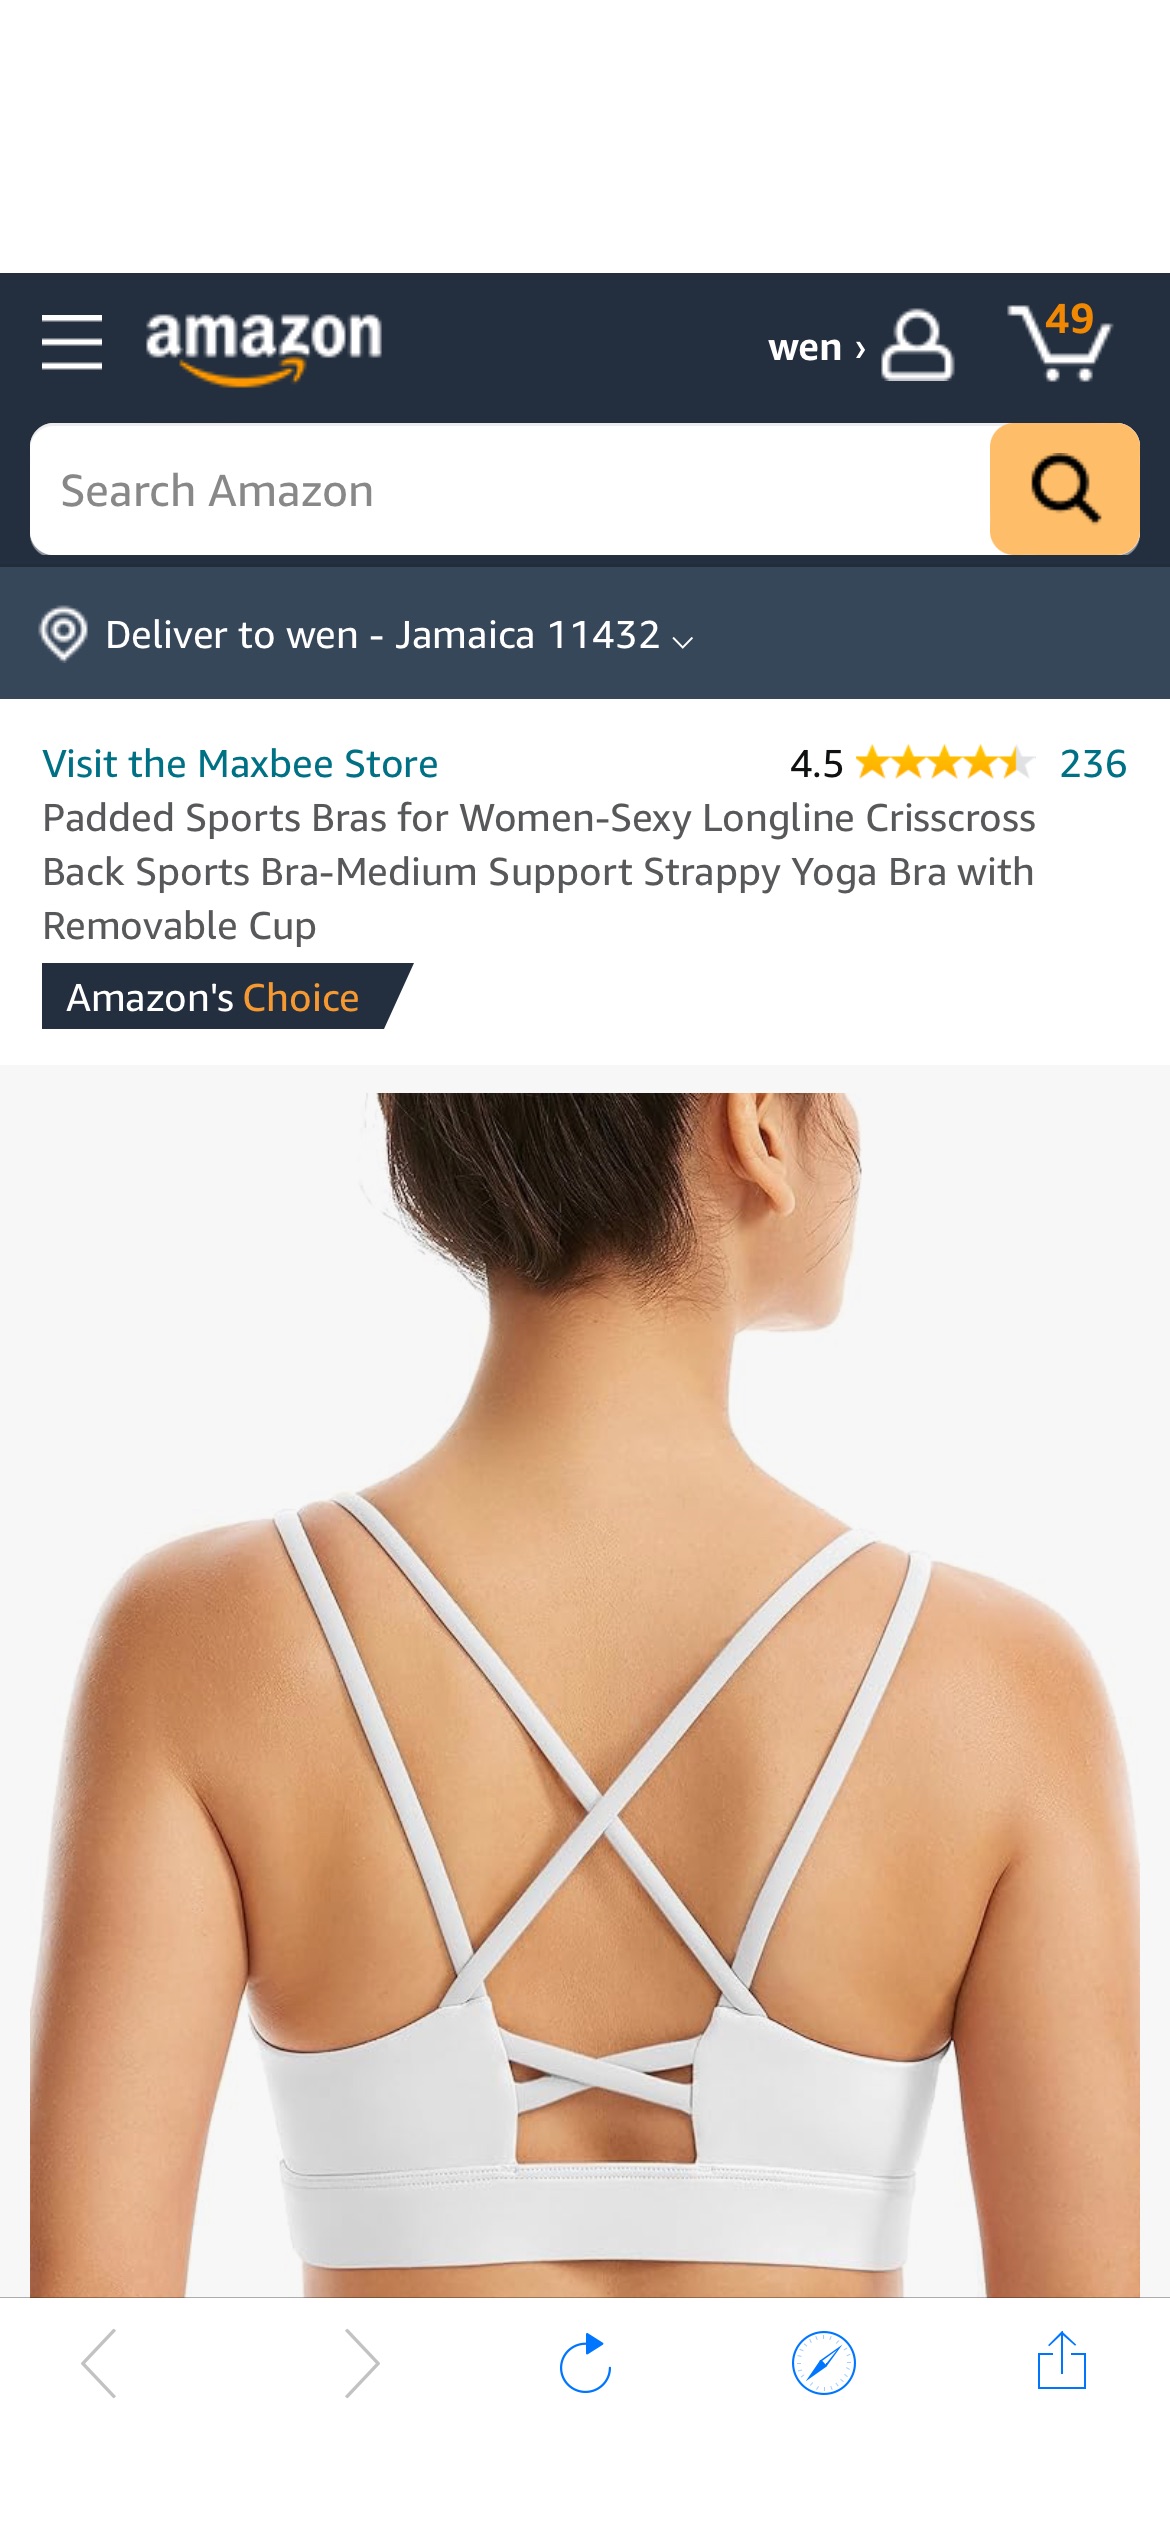 Amazon.com: Padded Sports Bras for Women-Sexy Longline Crisscross Back Sports Bra-Medium Support Strappy Yoga Bra with Removable Cup White : Clothing, Shoes & Jewelry